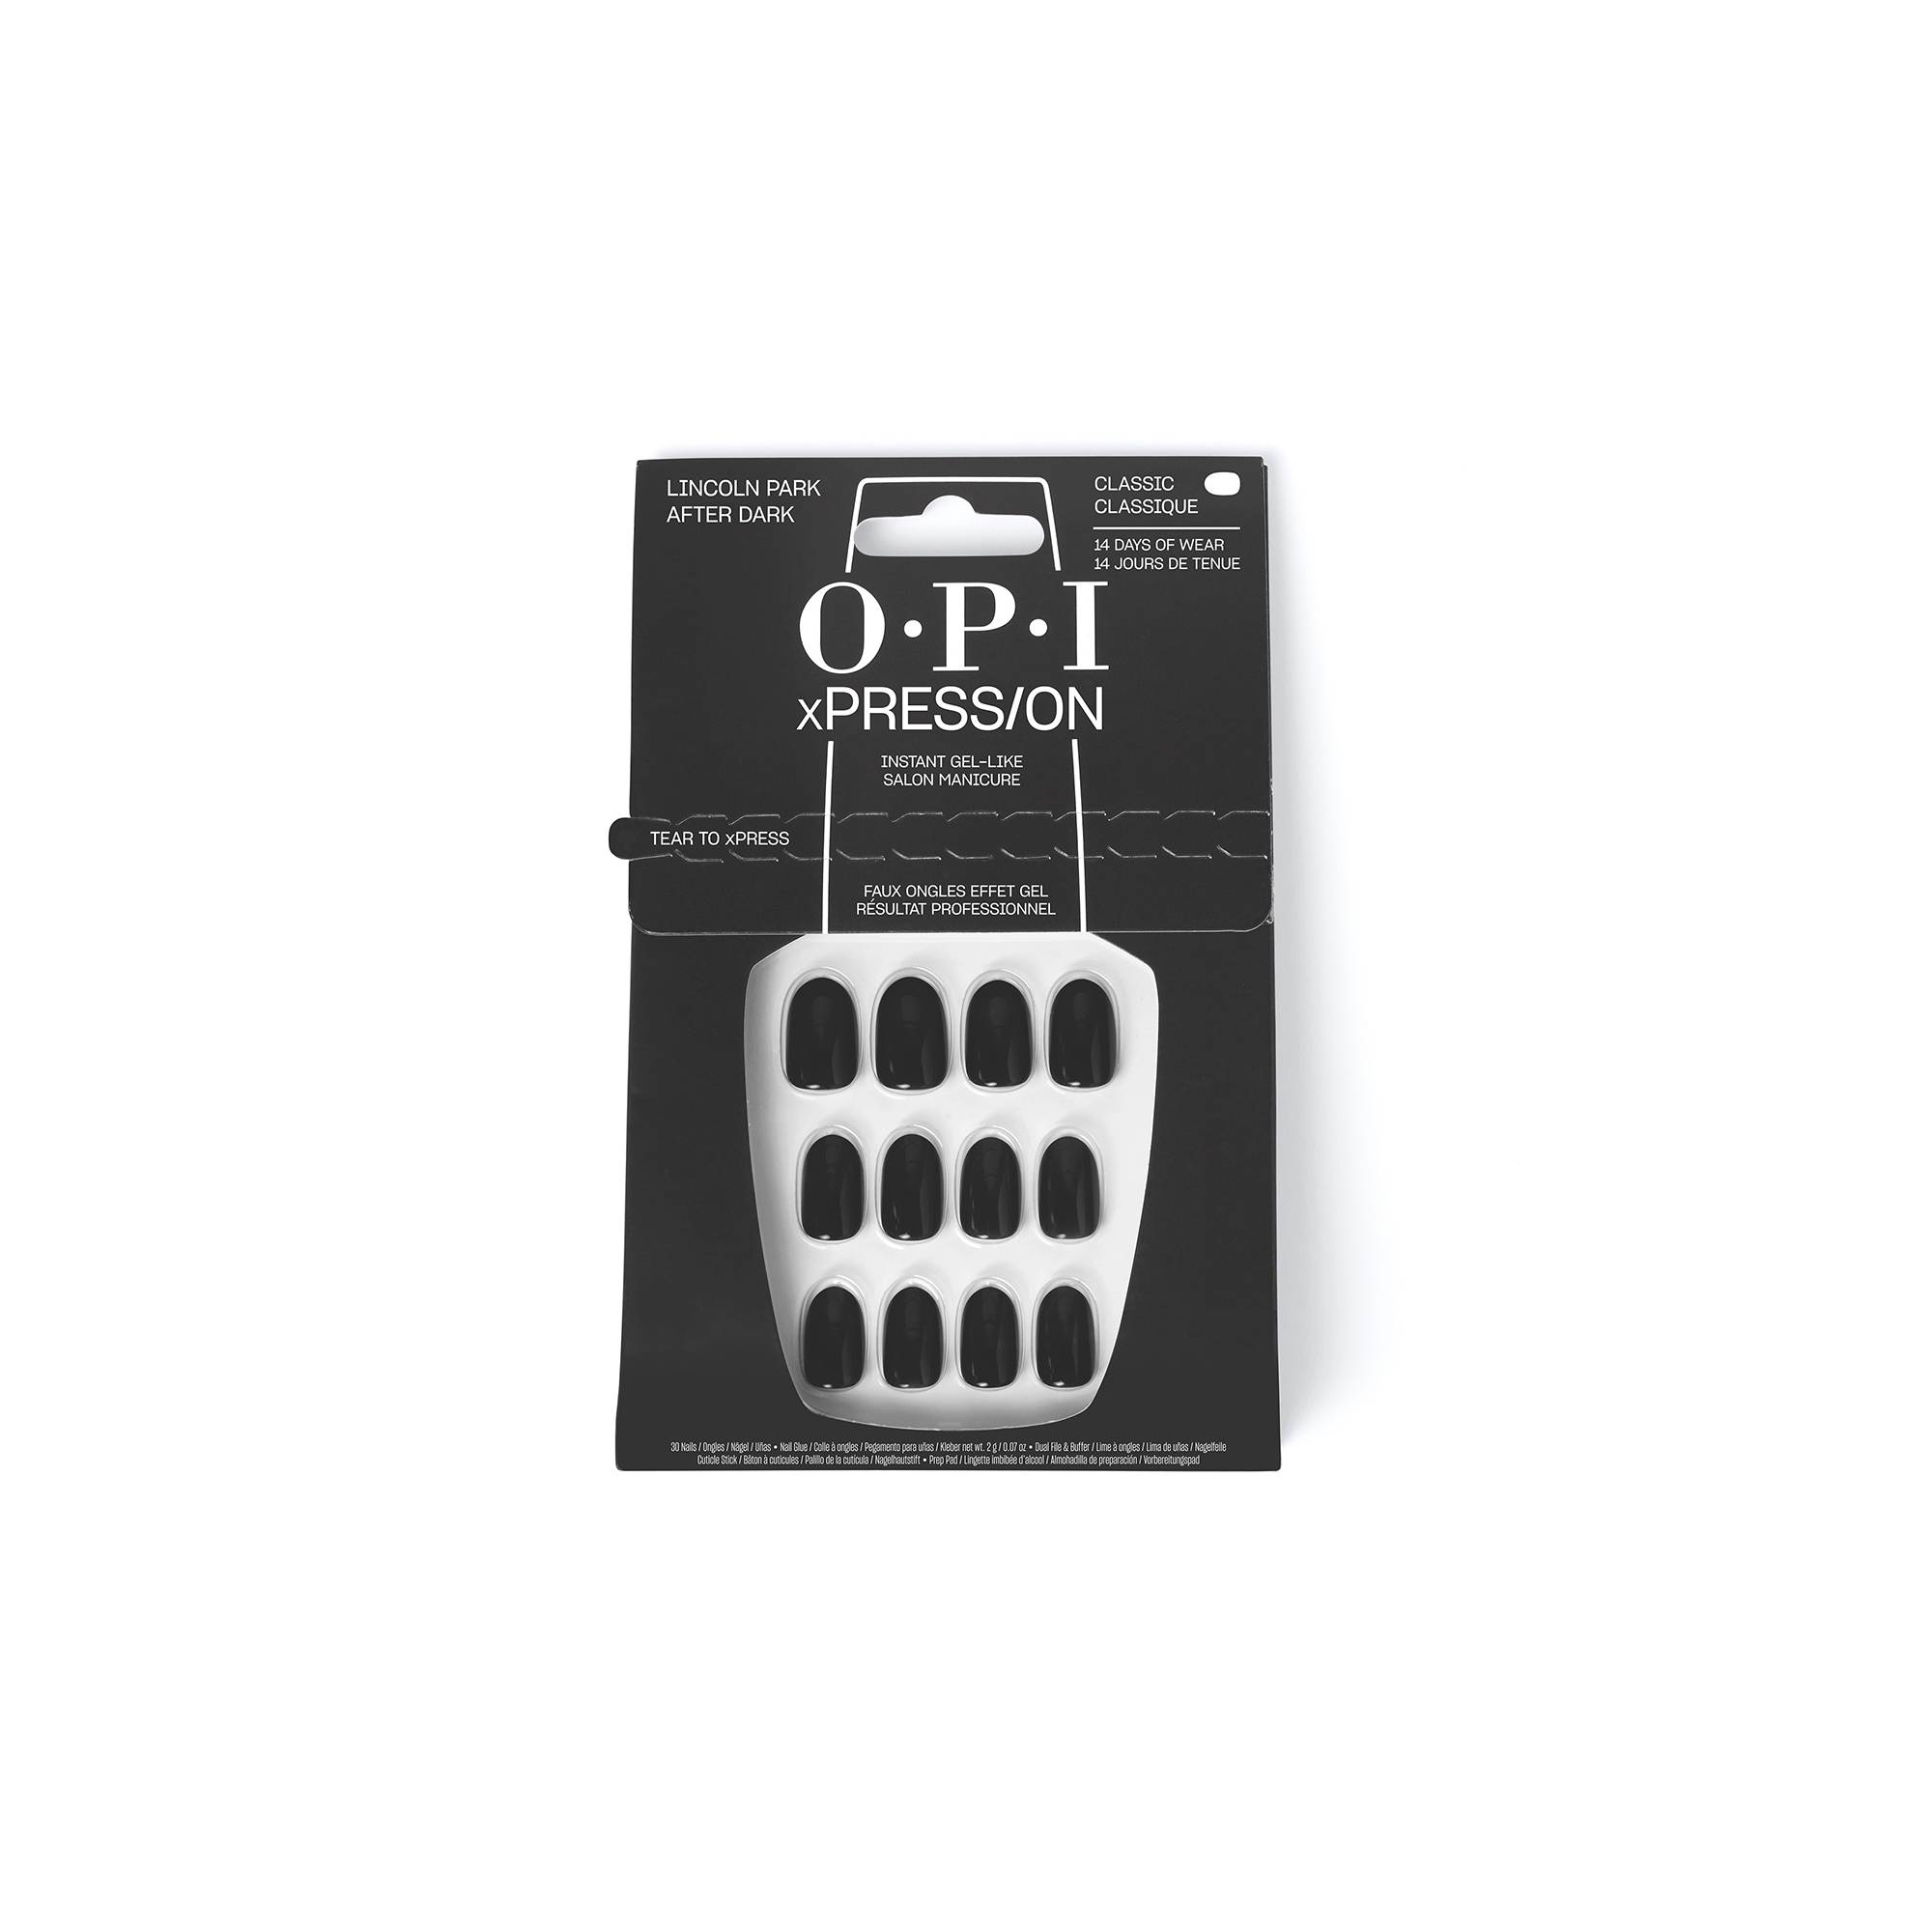 Faux-ongles xPRESS/ON - Lincoln Park After Dark™ de la marque OPI Contenance 2g - 1